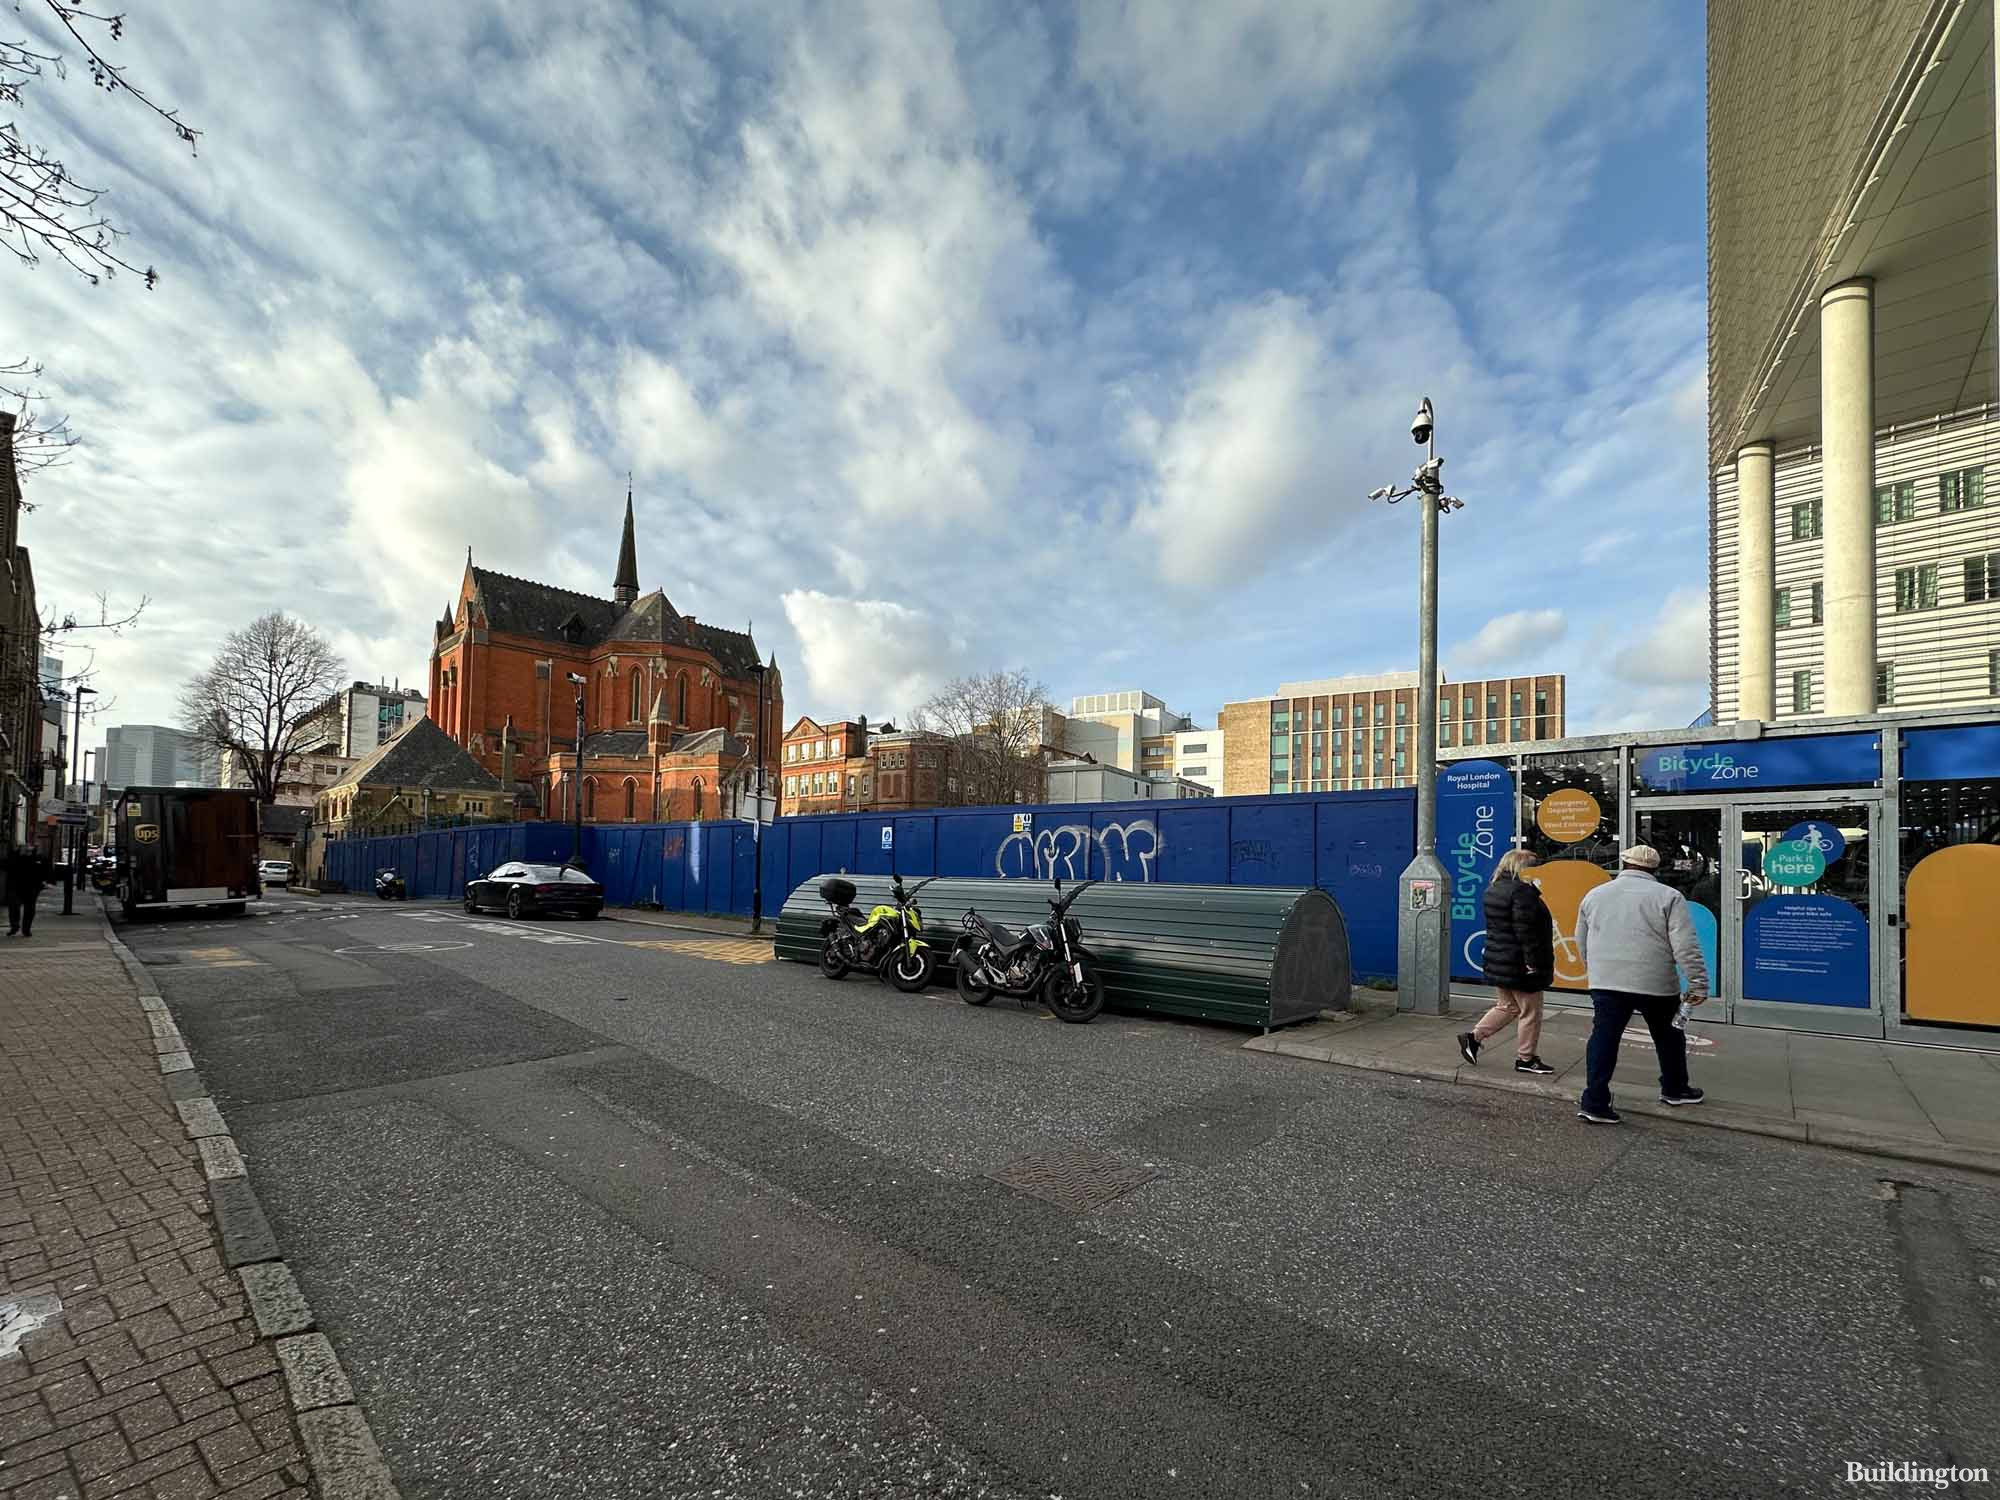 Whitechapel Road Development site on Newark Street in Whitechapel, London E1. The Royal London Hospital to the right and Church of St Augustine with St Philip in the background.